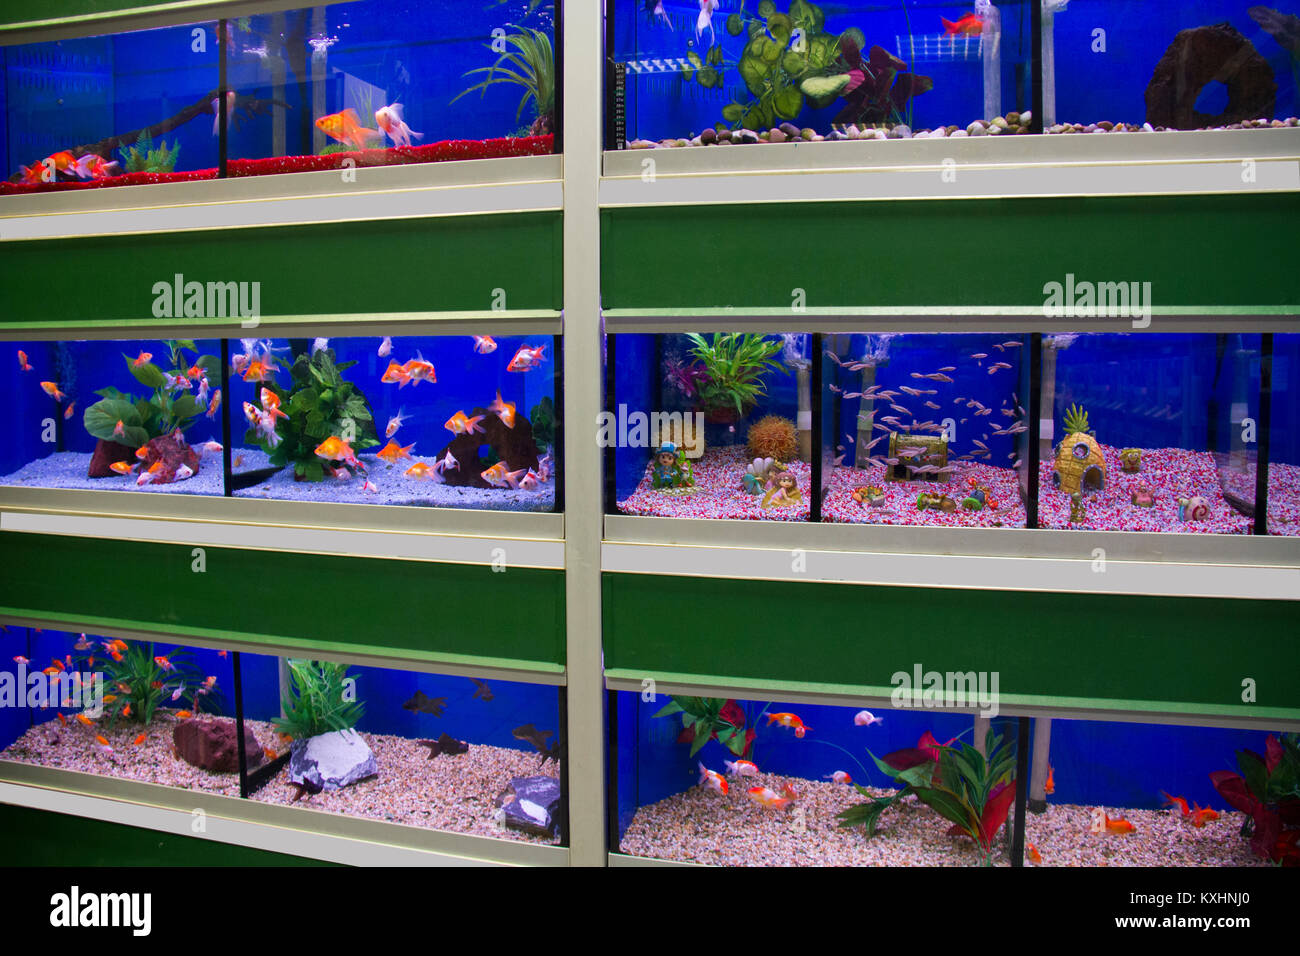 Pet Store Fish Tanks High Resolution Stock Photography And Images Alamy